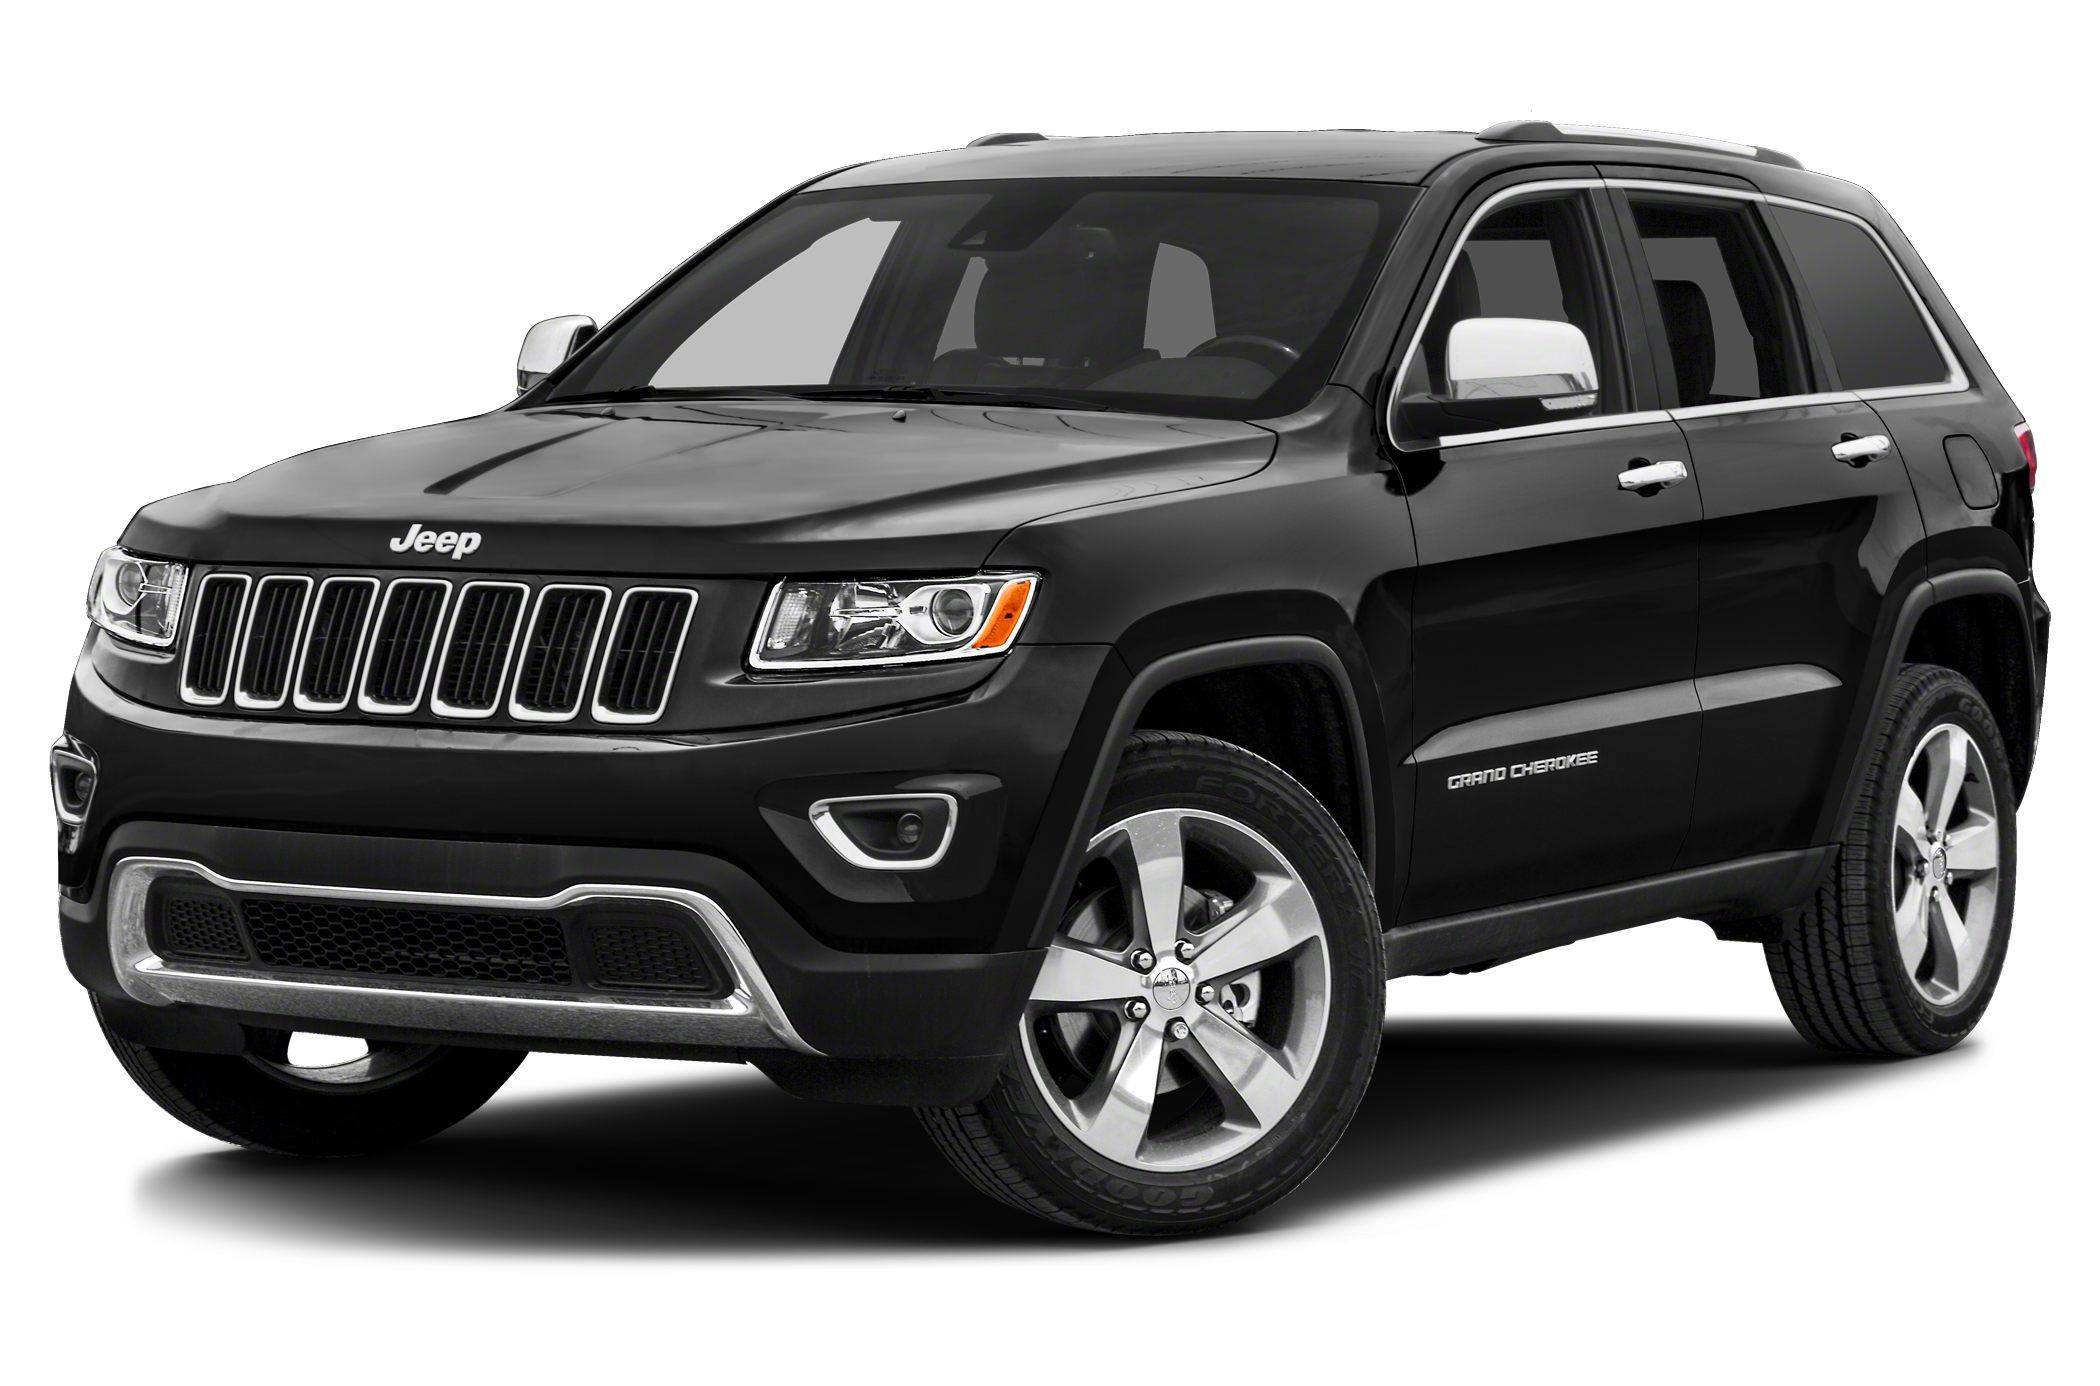 jeep grand cherokee black - Google Search | Cars and motorcycles ...